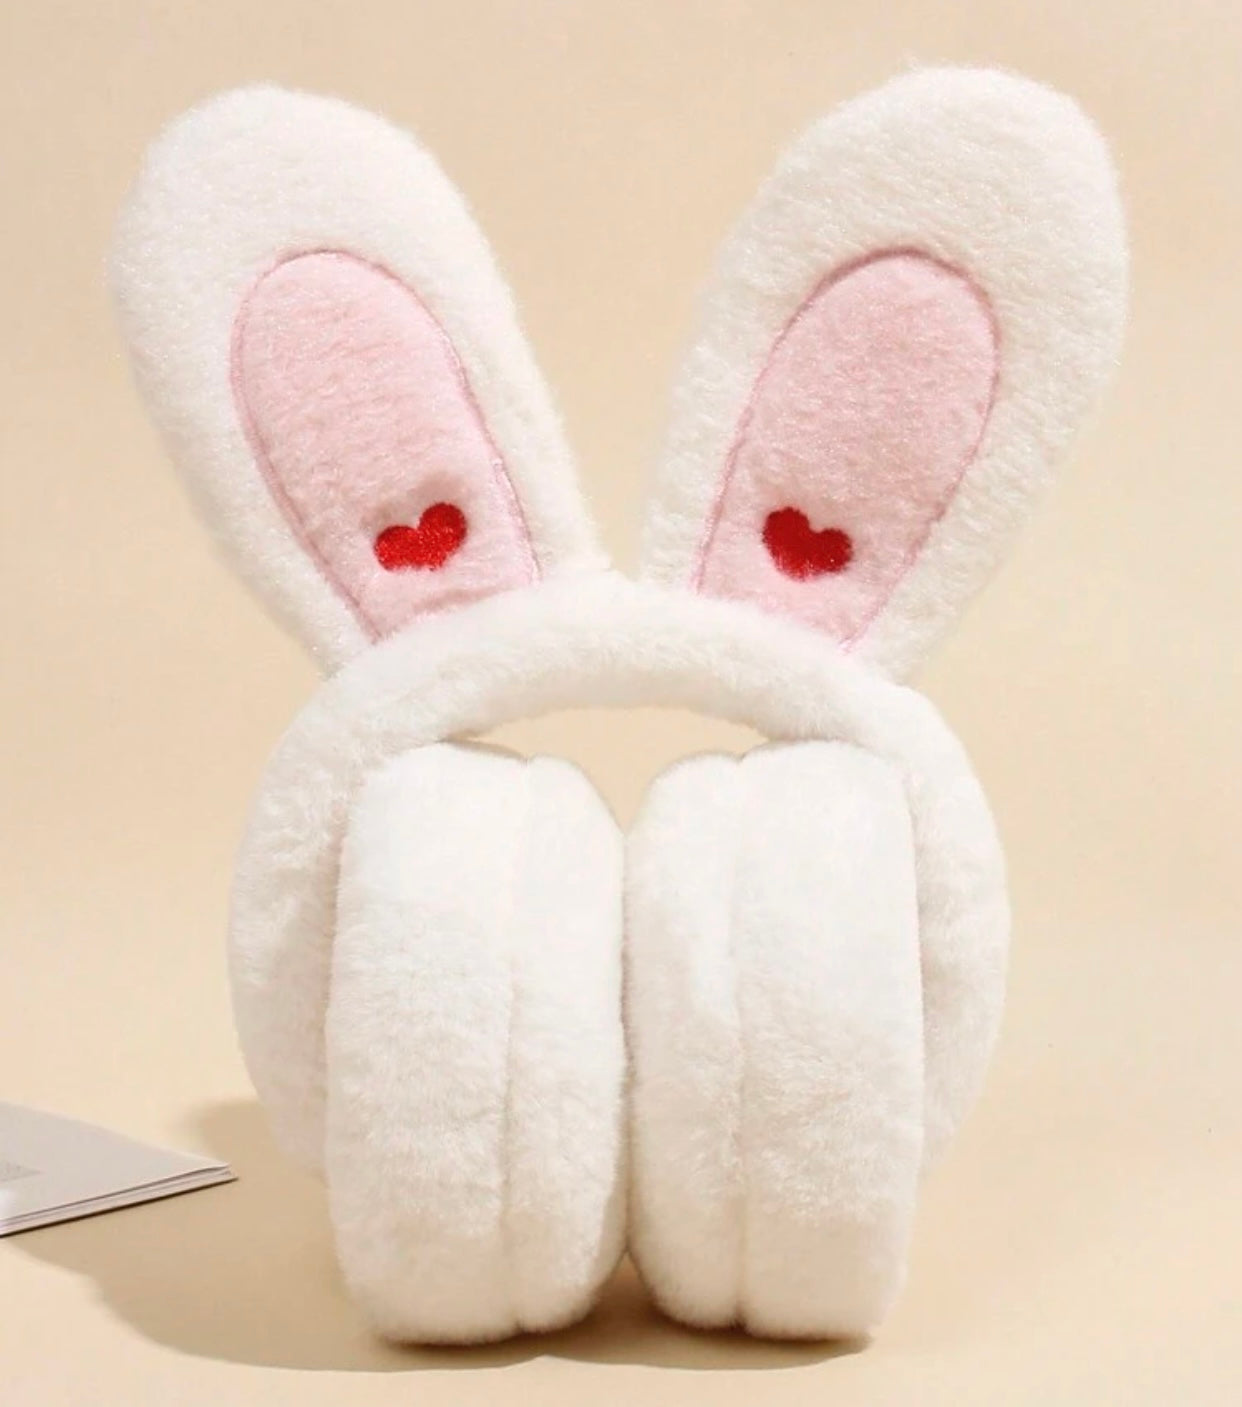 Large Fluffy Ear Muffs, Earmuffs, White Bunny Ears with Hearts, Kids & Adults